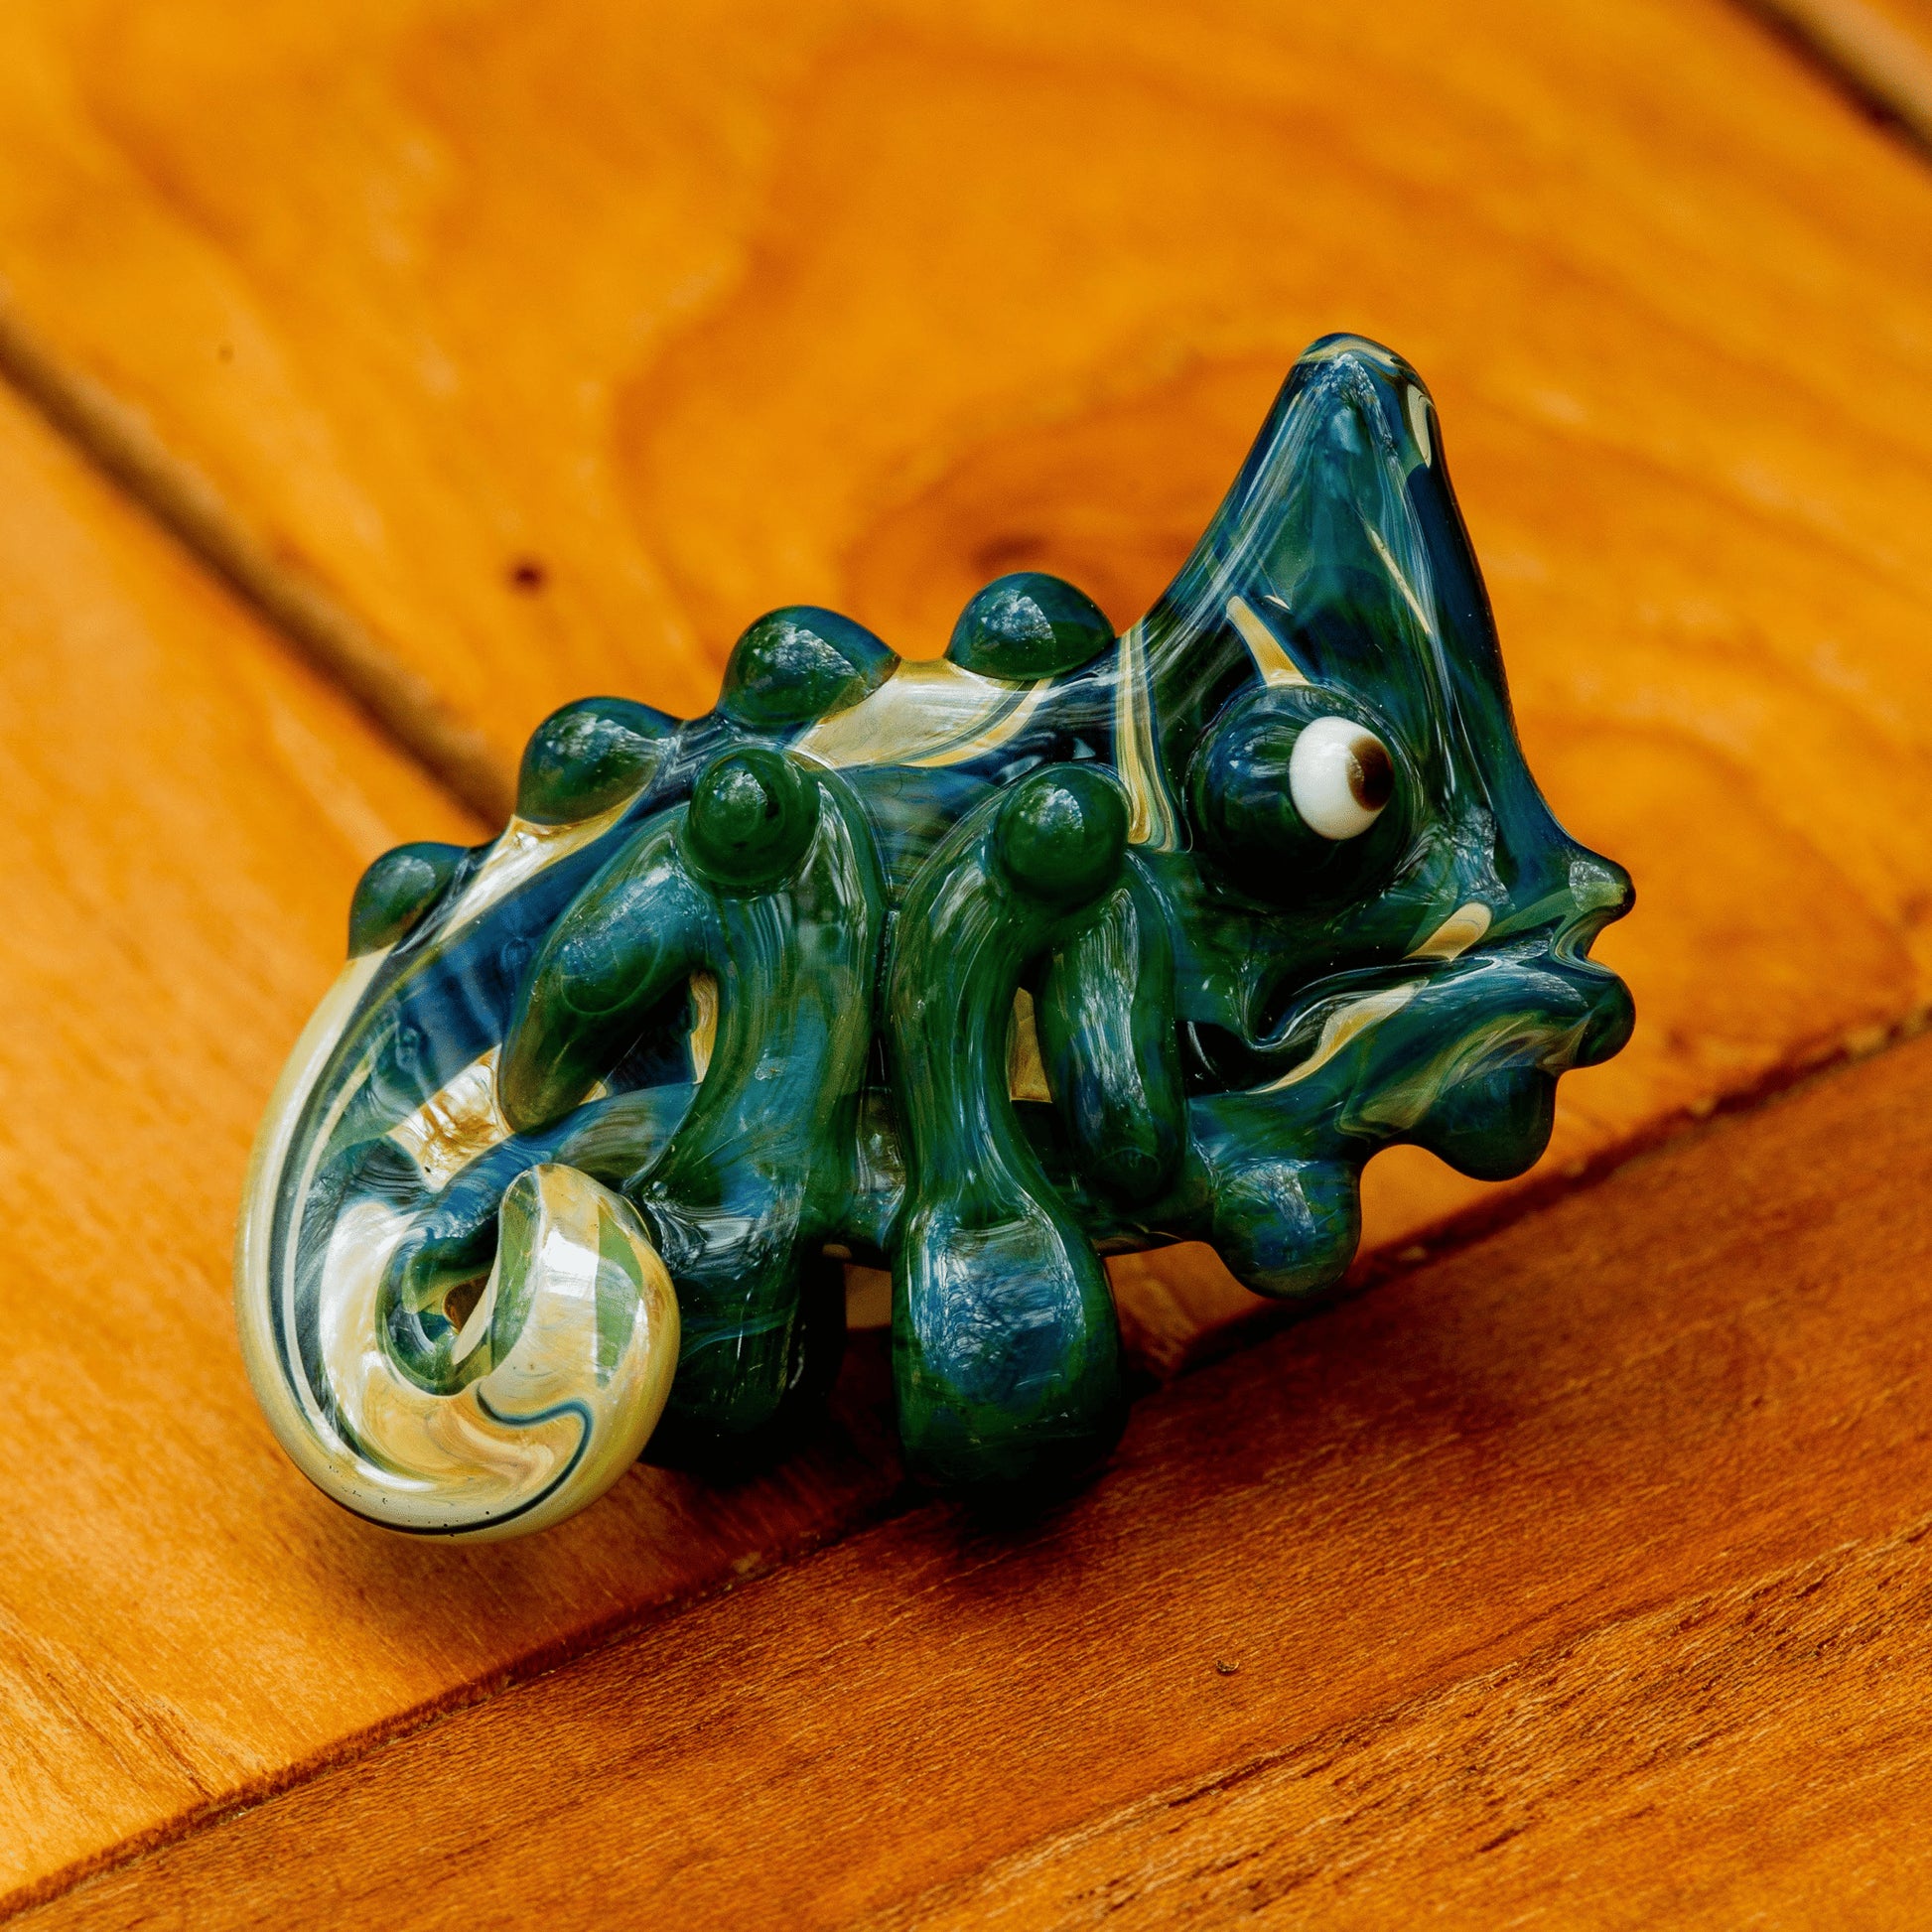 exquisite glass pendant - Chameleon Pendant (D) by Willy That Glass Guy